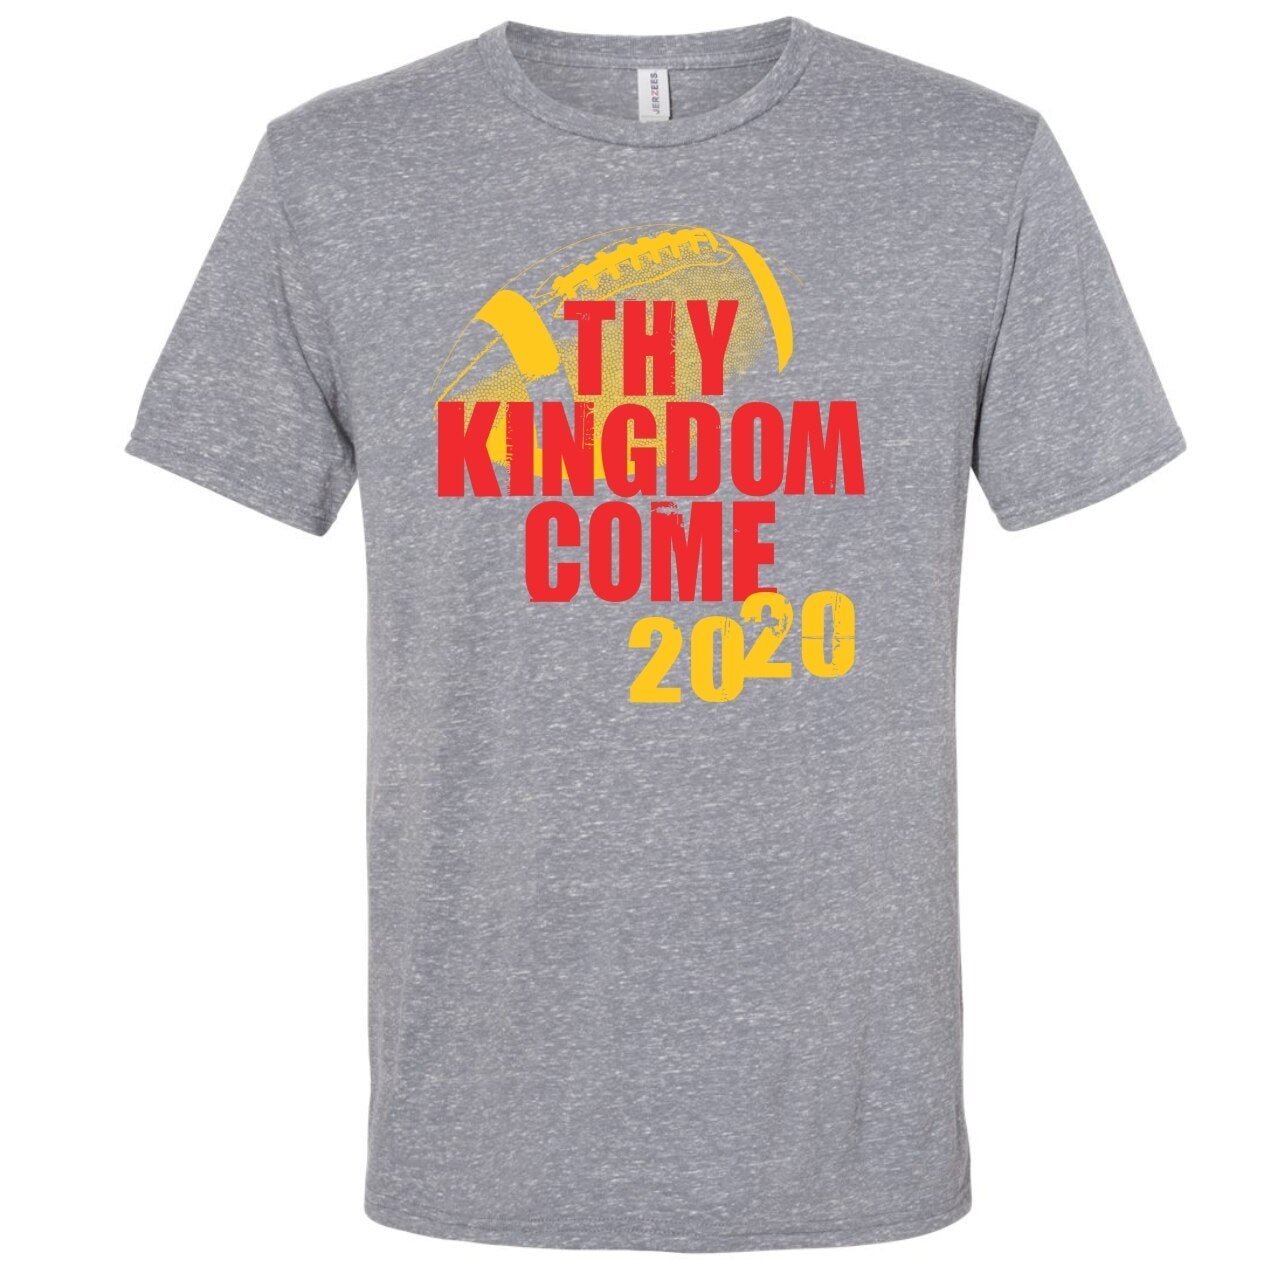 Thy Kingdom Come - Adult Tee - The Graphic Tee